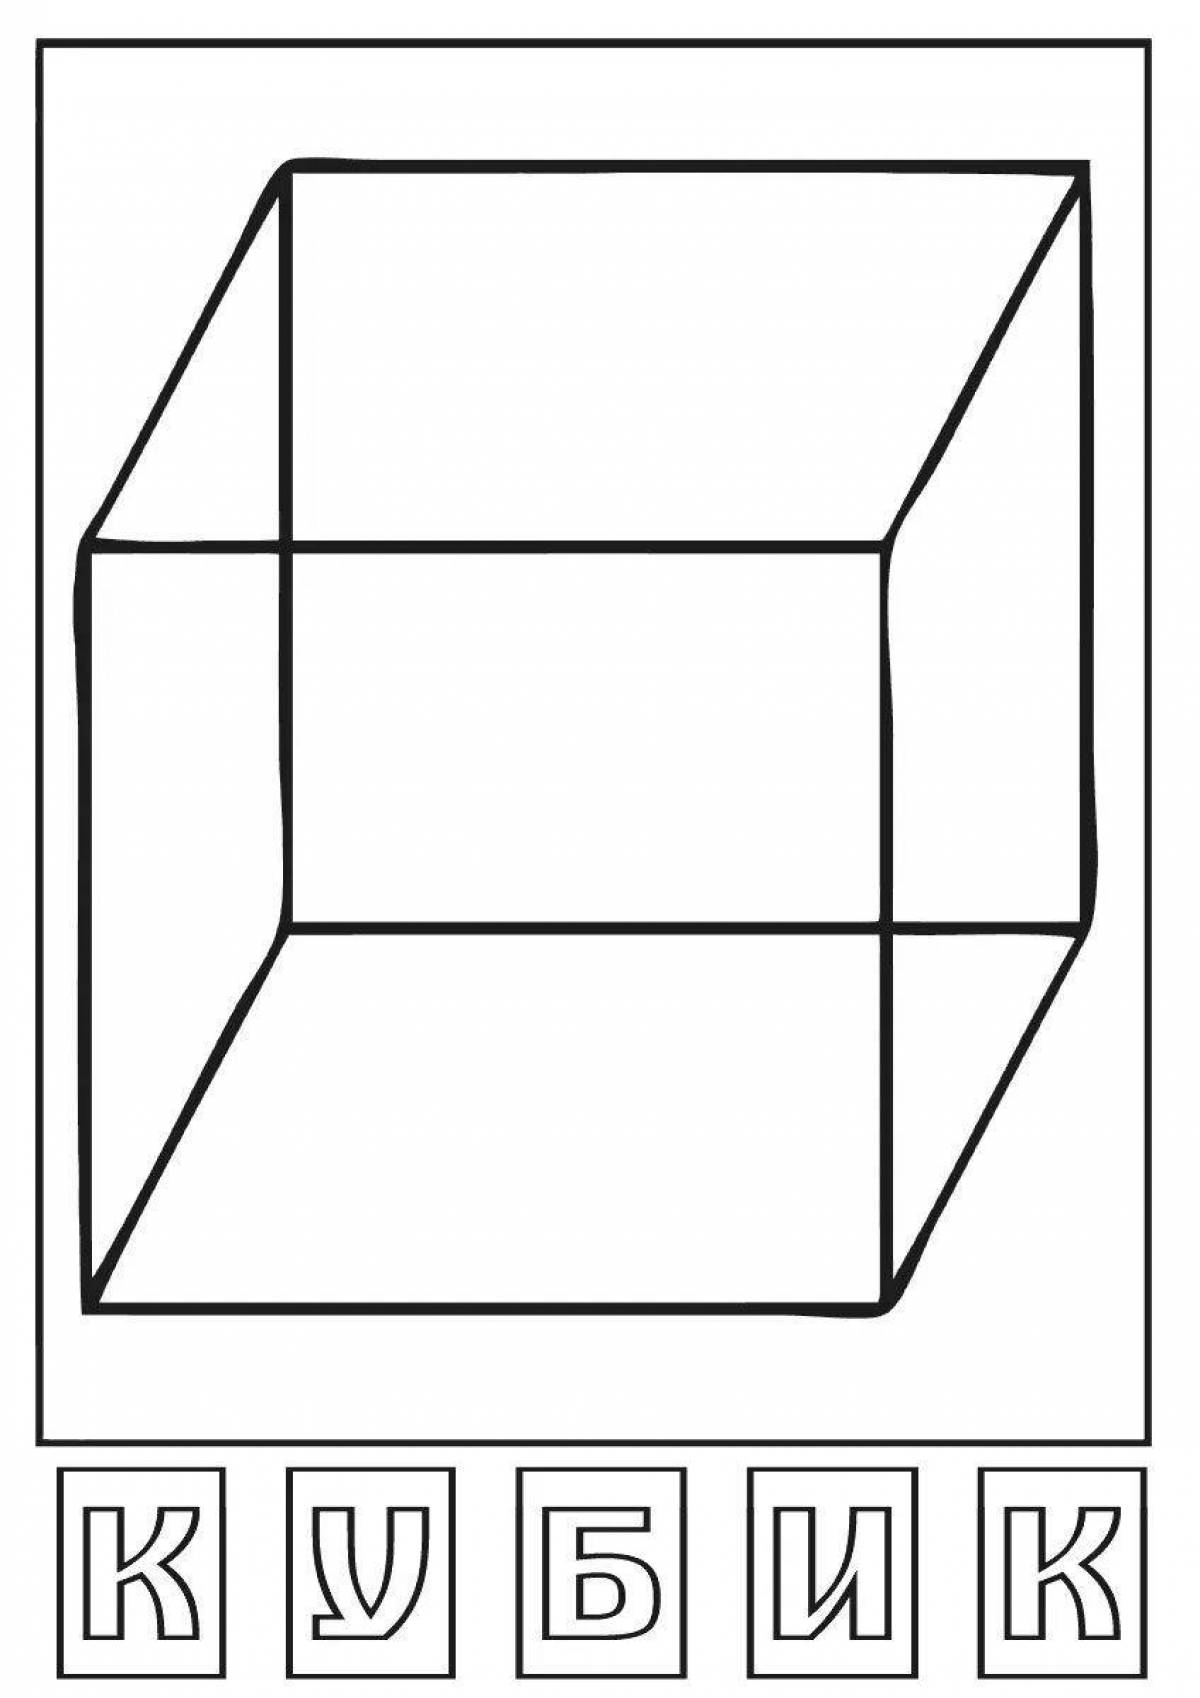 Fun cube coloring page for kids